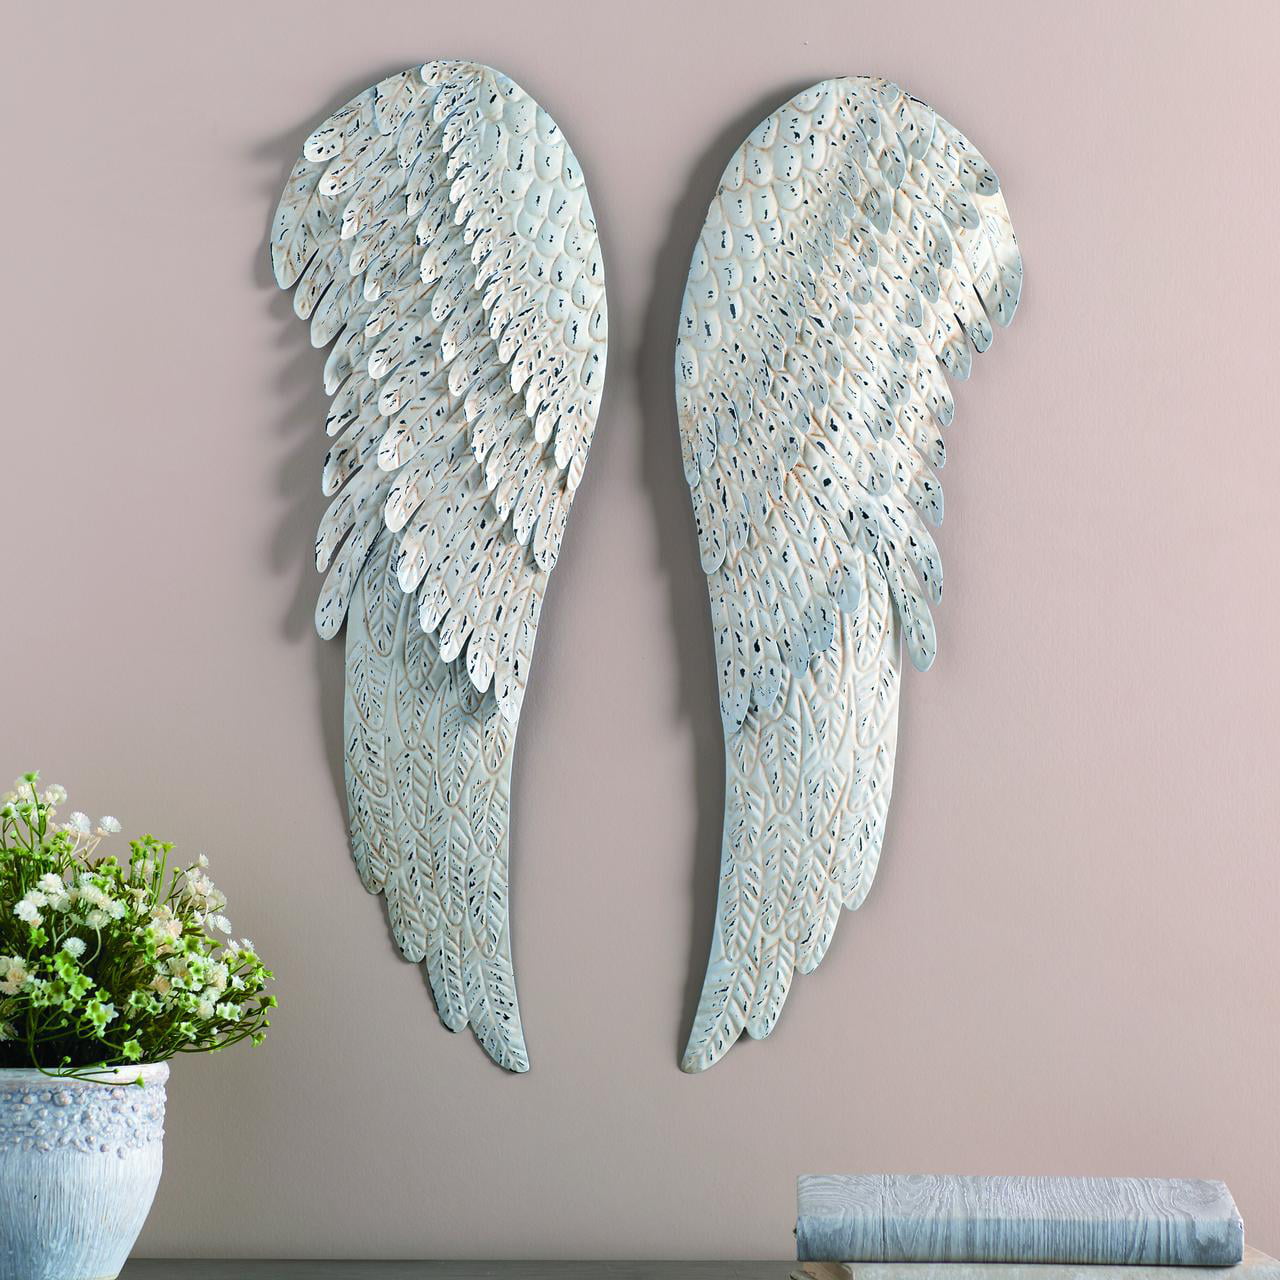 Metal Angel Wings Religious Distressed Vintage Rustic Wall Art Home Decor 